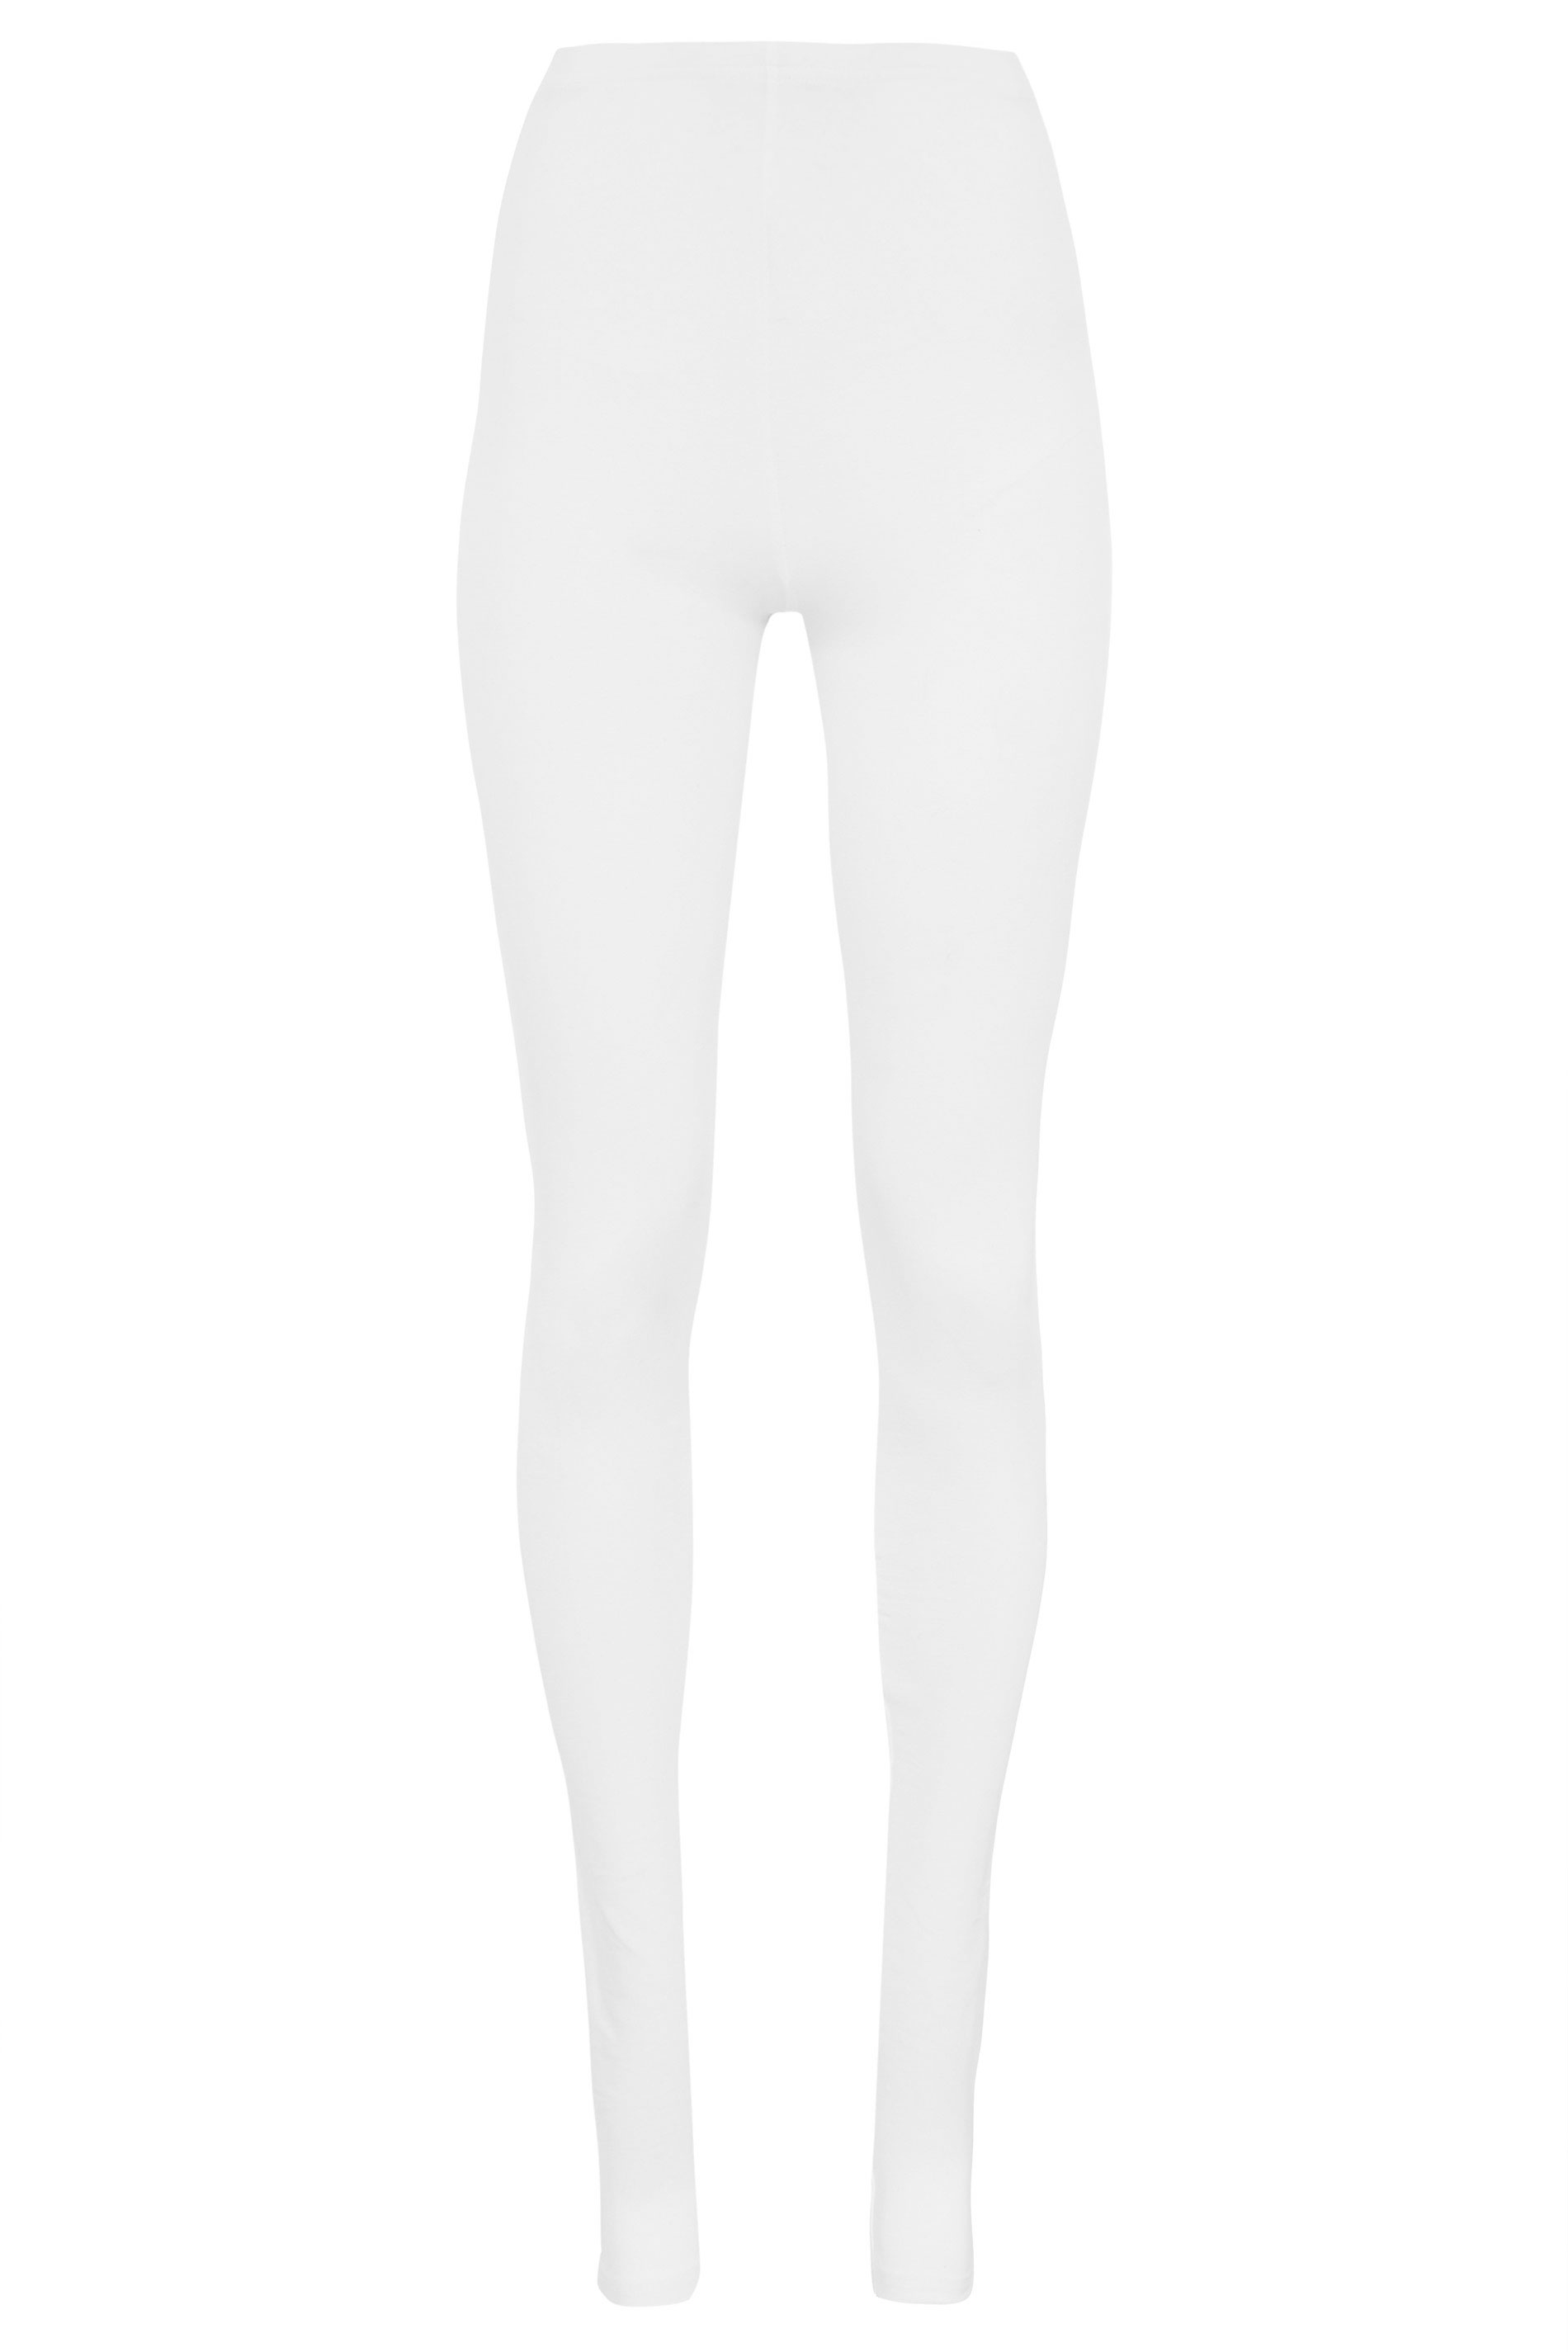 LTS MADE FOR GOOD White Organic Cotton Leggings | Long Tall Sally